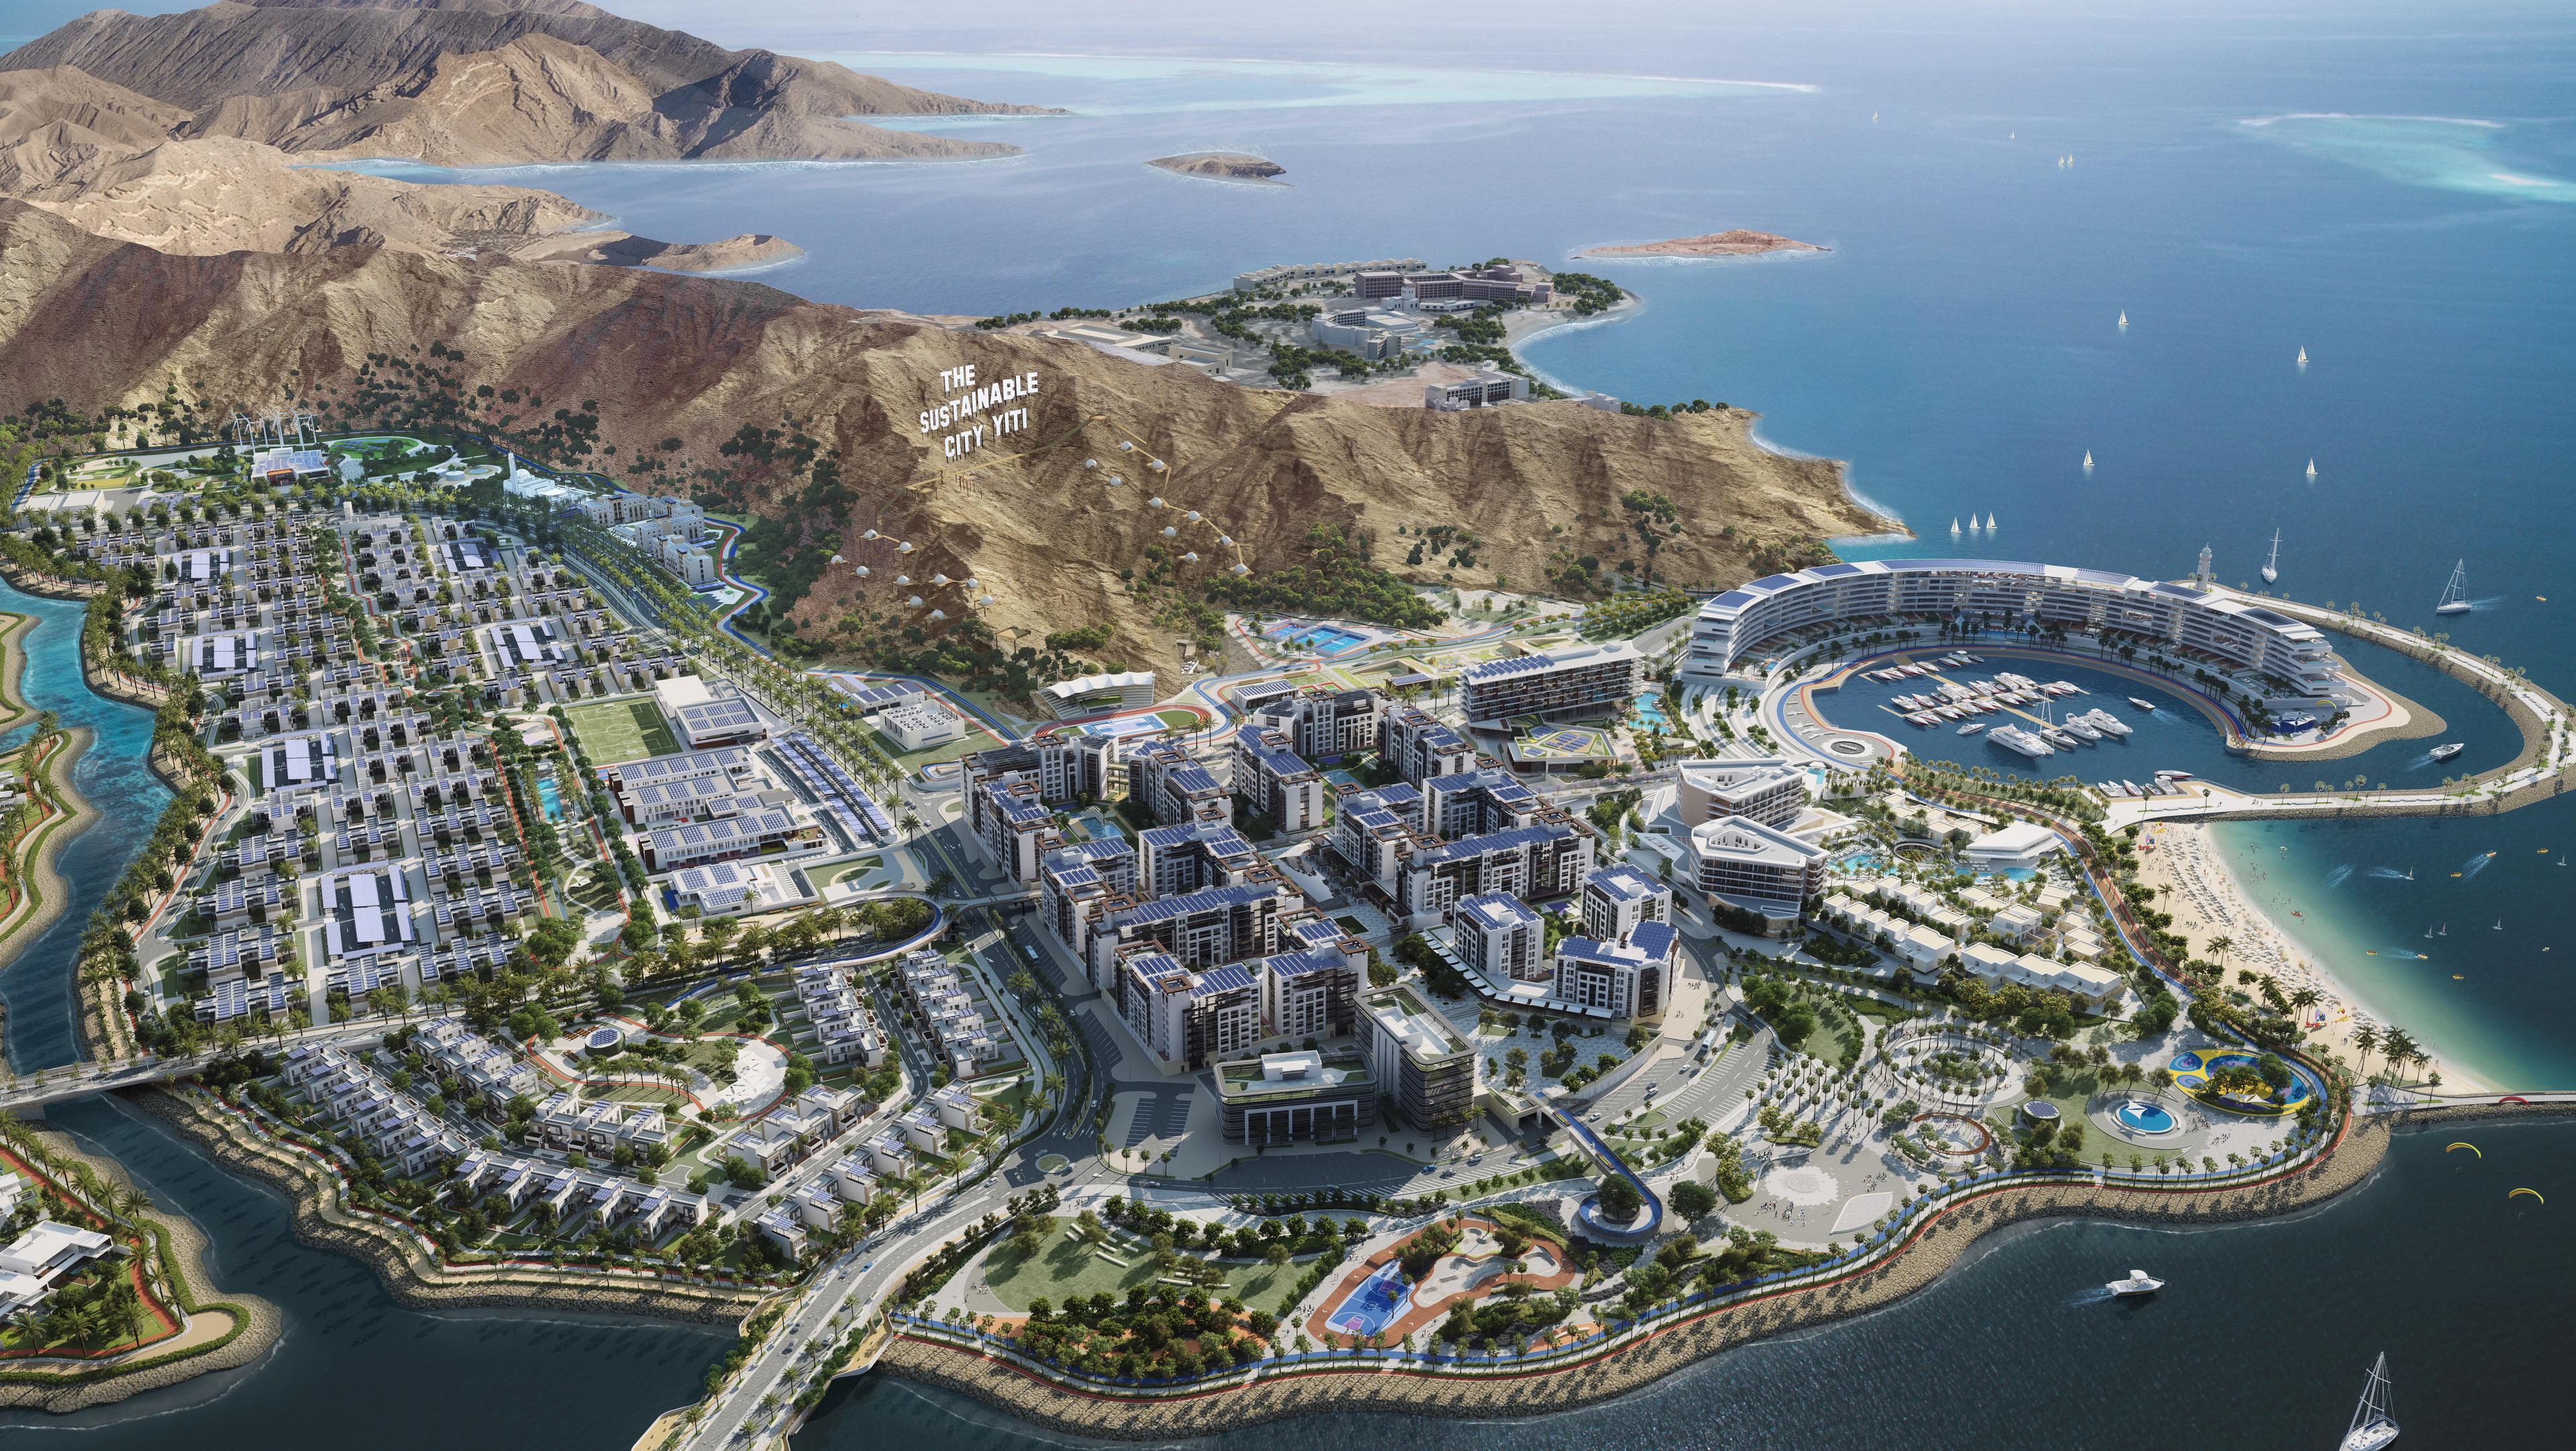 The Road to Net-Zero Emissions Living in Oman Has Begun: With the Sustainable City – Yiti Well Underway, the Launch of the Property Sales Sheds Light on Its Remarkable Progress